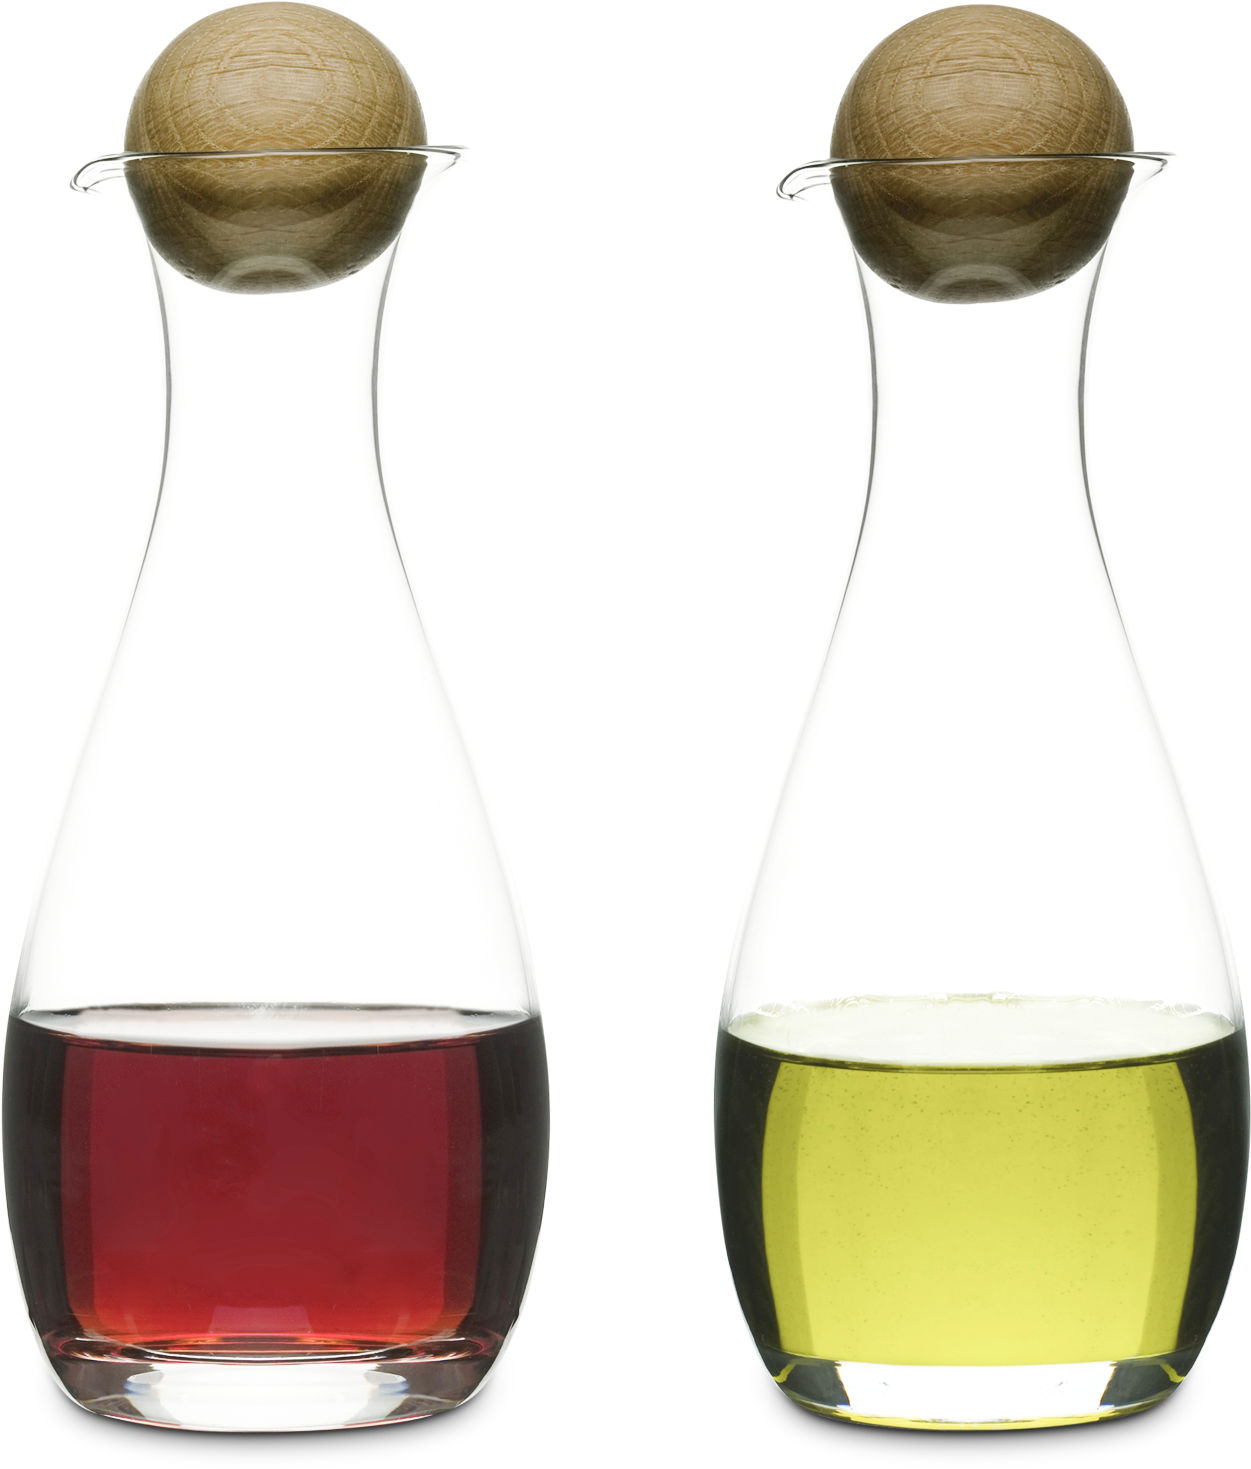 A Couple Of Glass Containers With Different Colored Liquid